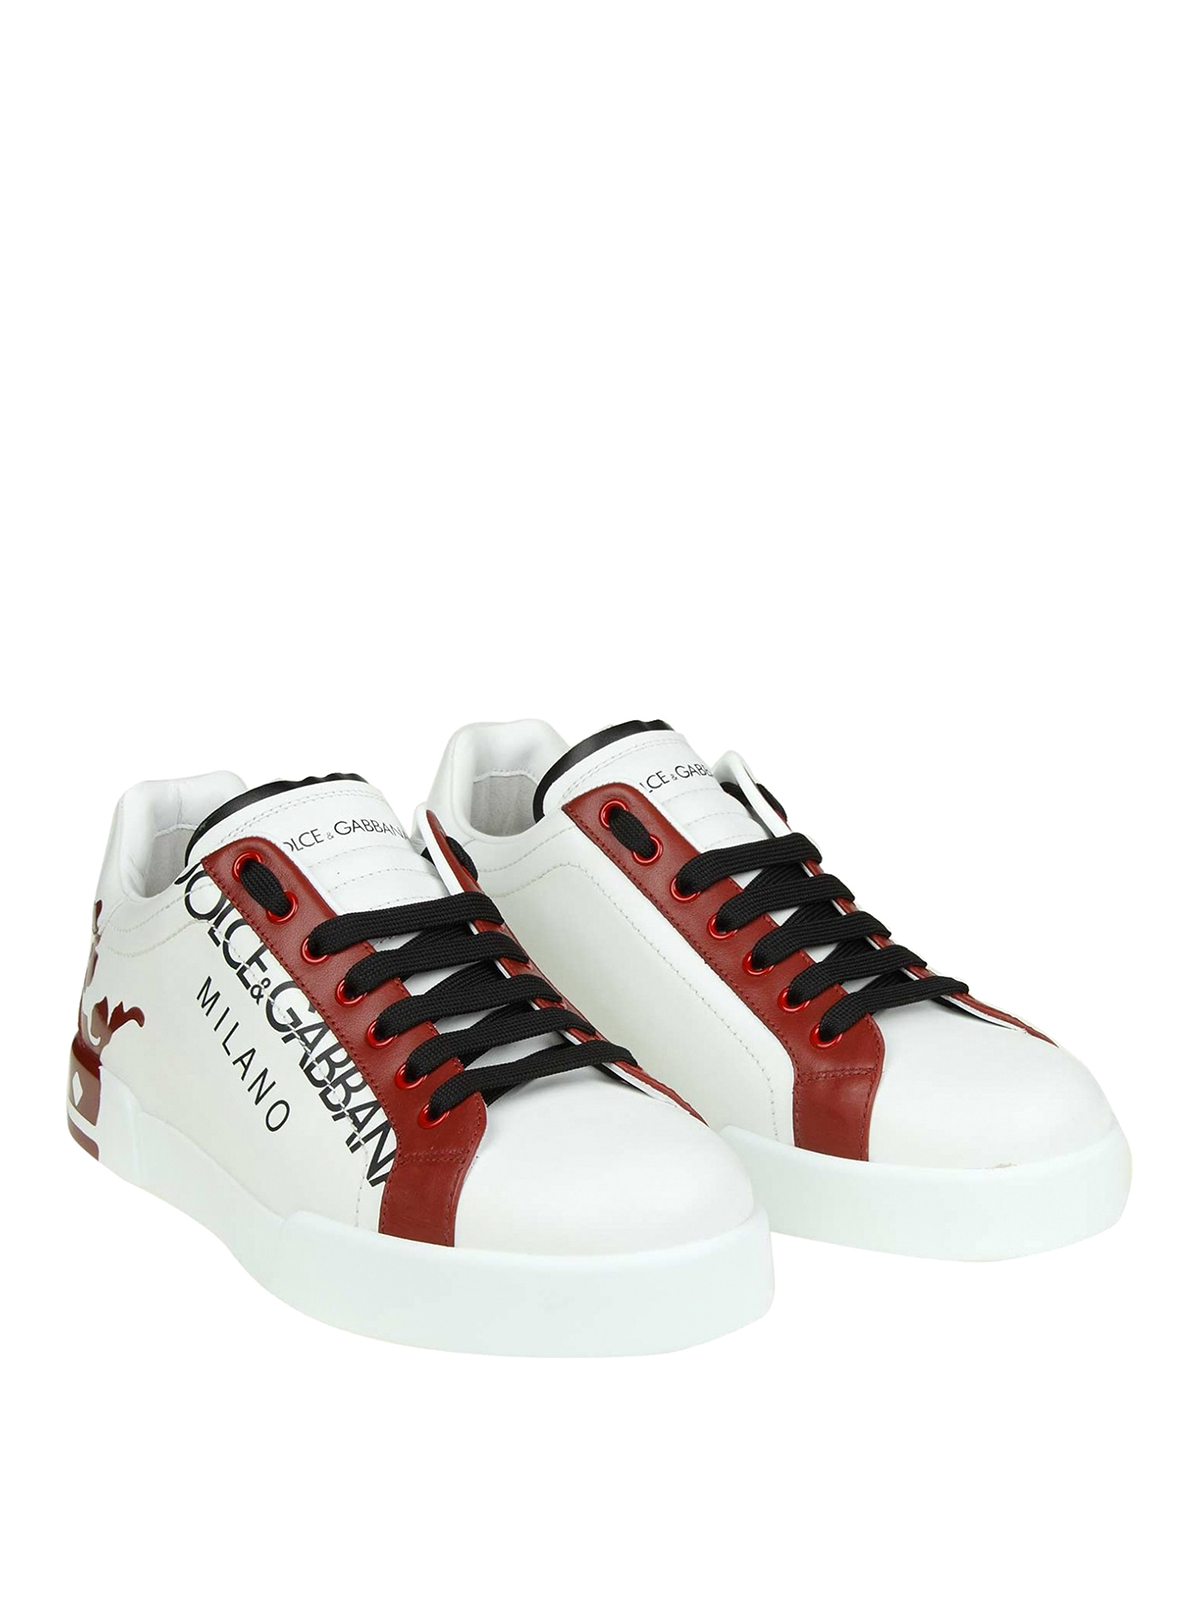 dolce and gabbana trainers red